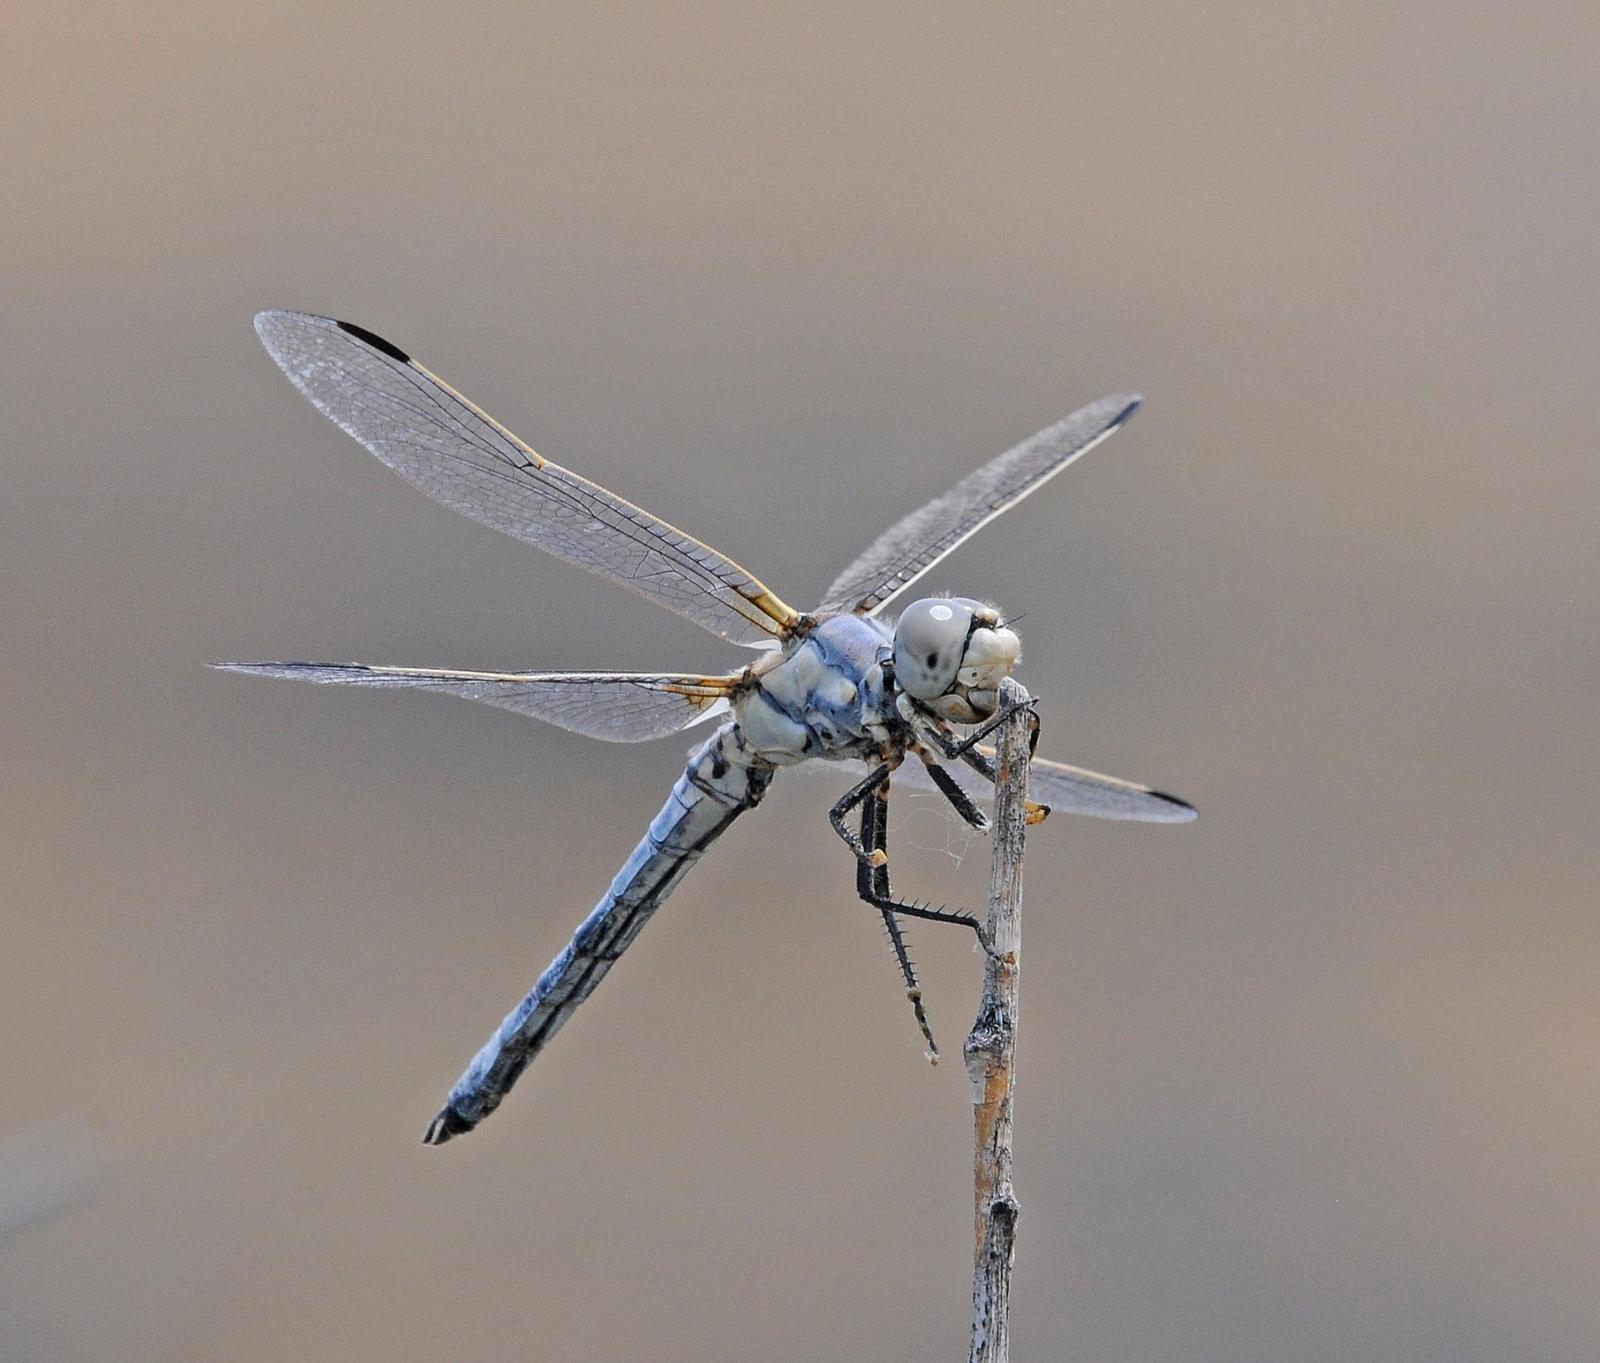 Bleached Skimmer Photo by marion dobbs